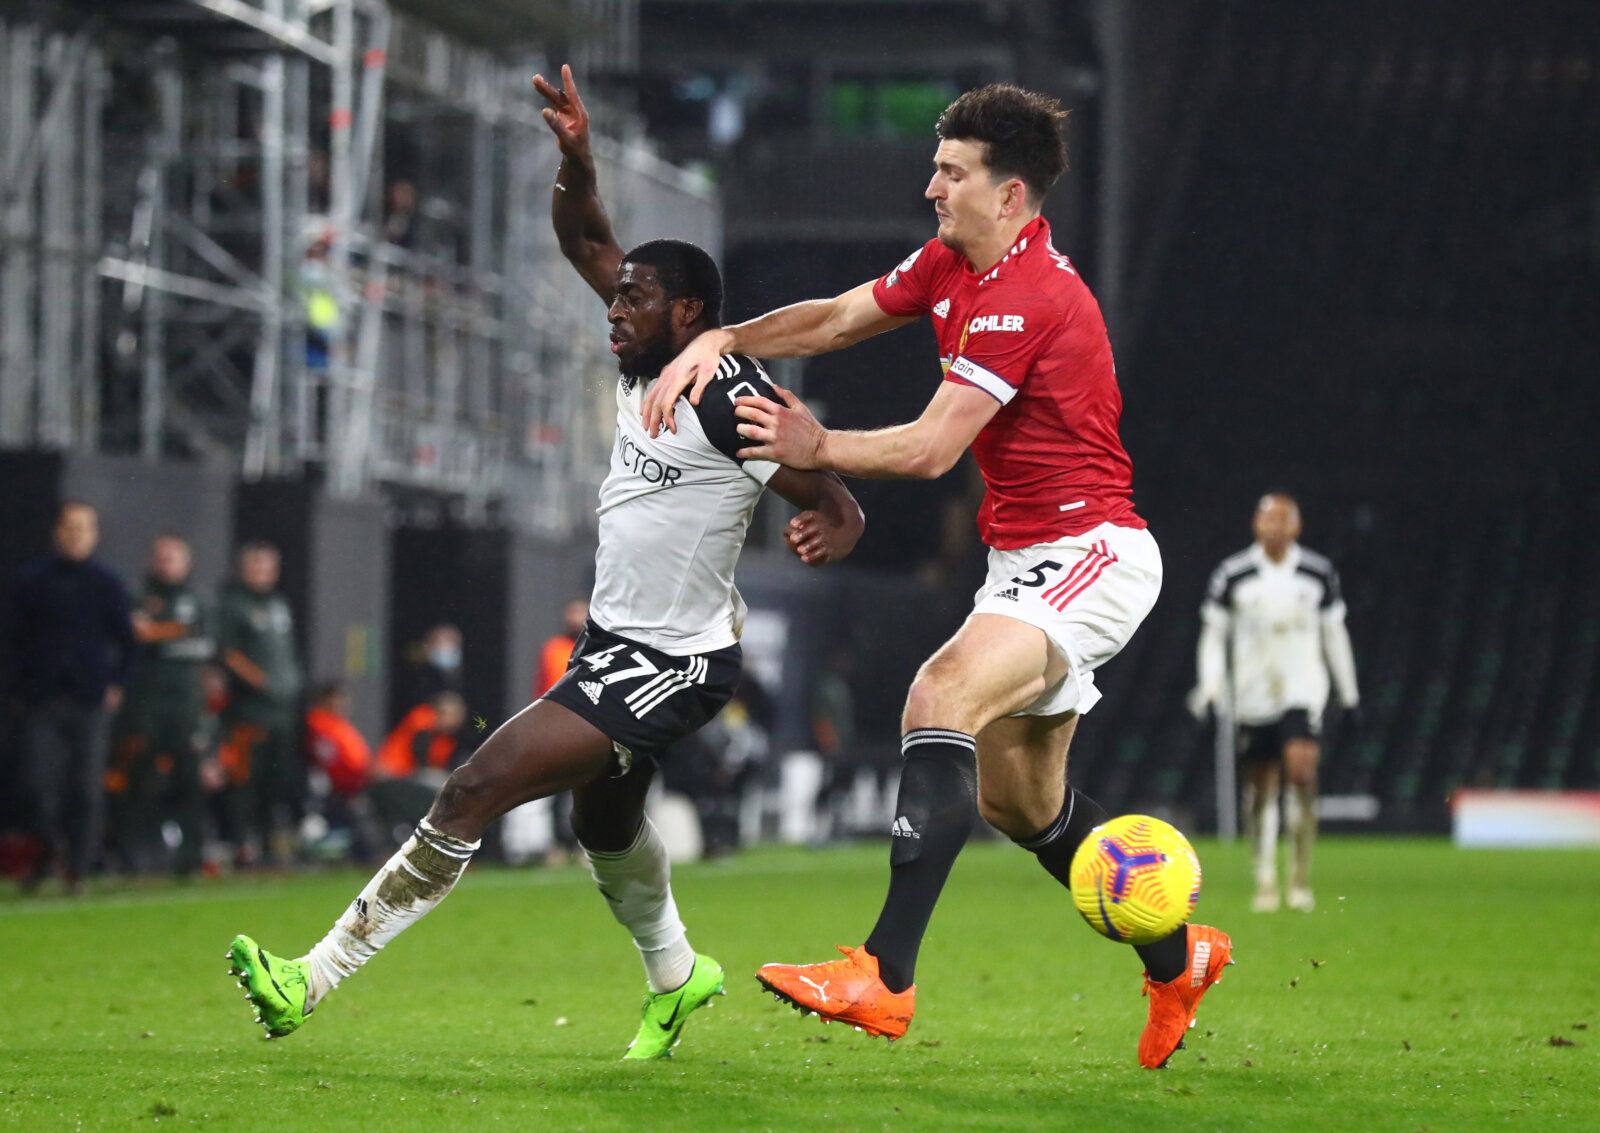 Soccer Football - Premier League - Fulham v Manchester United - Craven Cottage, London, Britain - January 20, 2021 Fulham's Aboubakar Kamara in action with Manchester United's Harry Maguire Pool via REUTERS/Clive Rose EDITORIAL USE ONLY. No use with unauthorized audio, video, data, fixture lists, club/league logos or 'live' services. Online in-match use limited to 75 images, no video emulation. No use in betting, games or single club /league/player publications.  Please contact your account repr